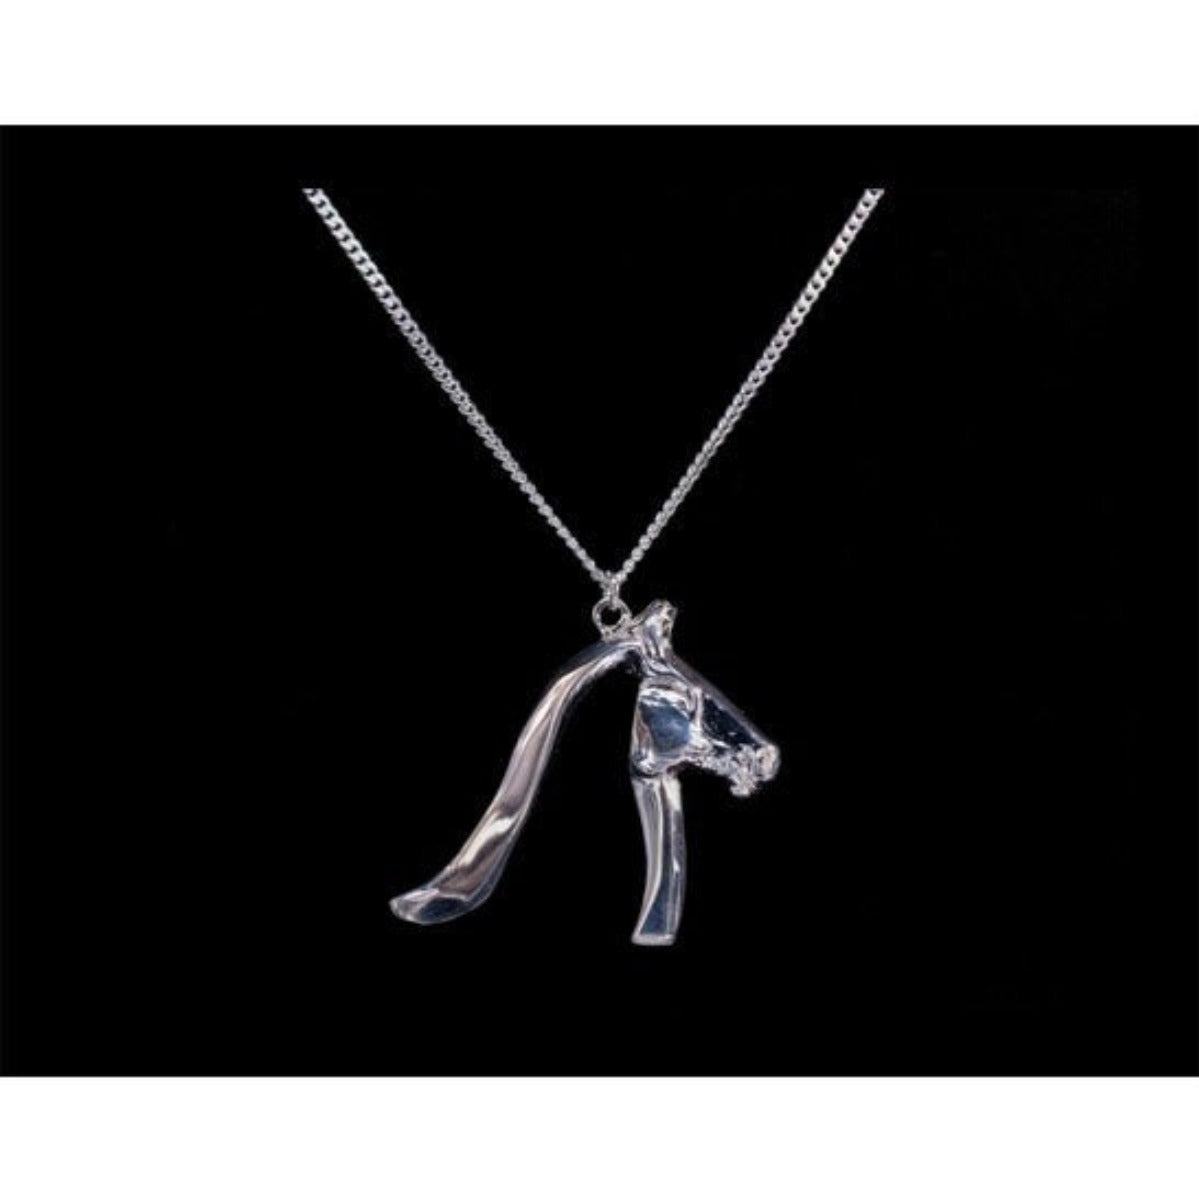 Buy Horse Necklace, Cord or Chain, Silver Horse Head Jewelry Gifts, Pendant  Choker, Adjustable Length or 16 18 20 22 24 30 Inch Stainless Steel Online  in India - Etsy